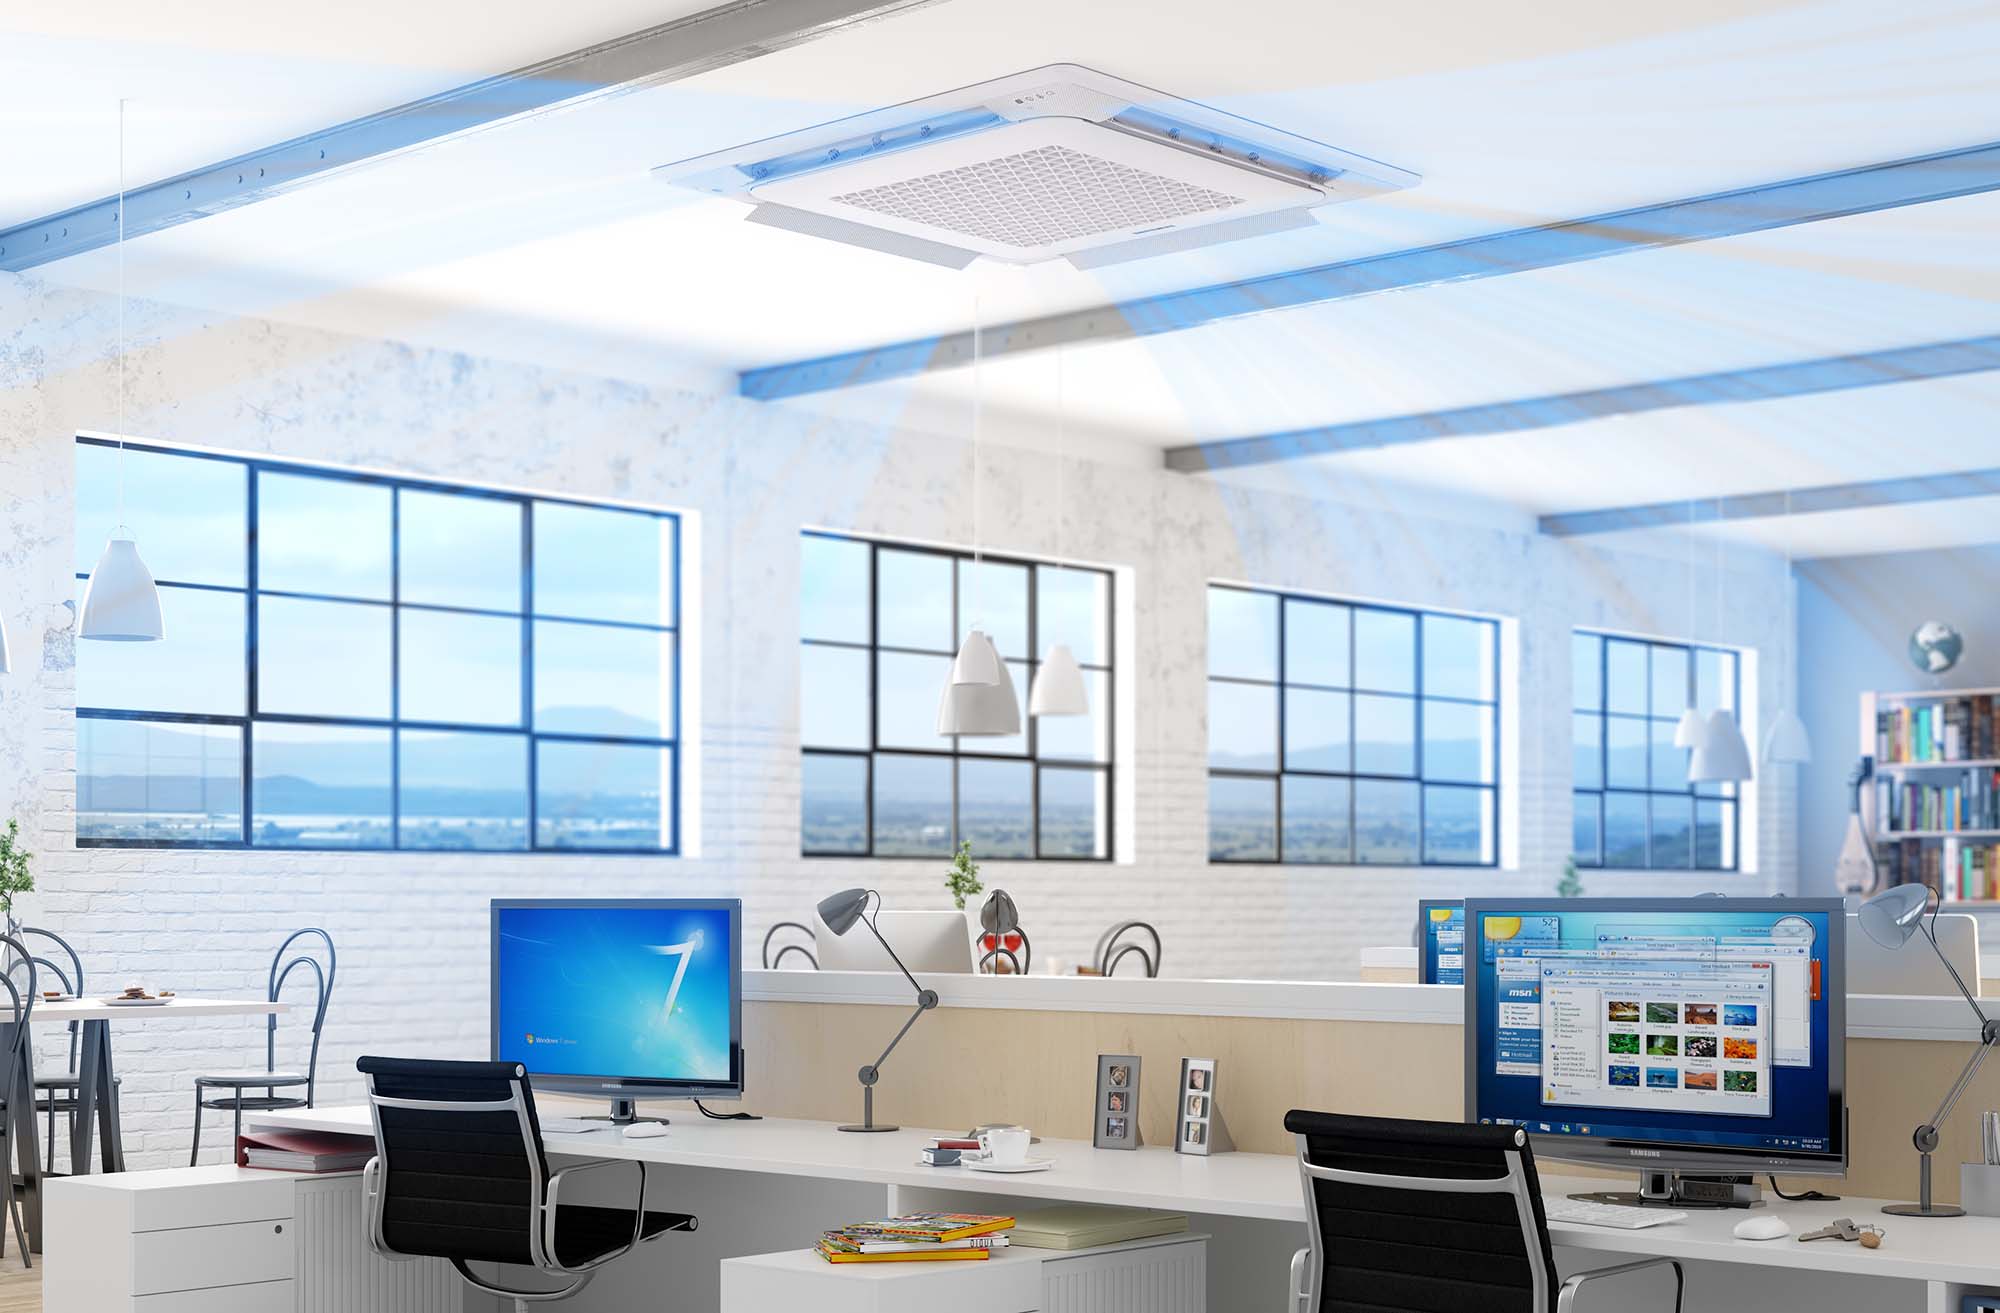 SAMSUNG HVAC System Helps Create Safer and More Comfortable Indoor Environment with their Air Quality Solutions